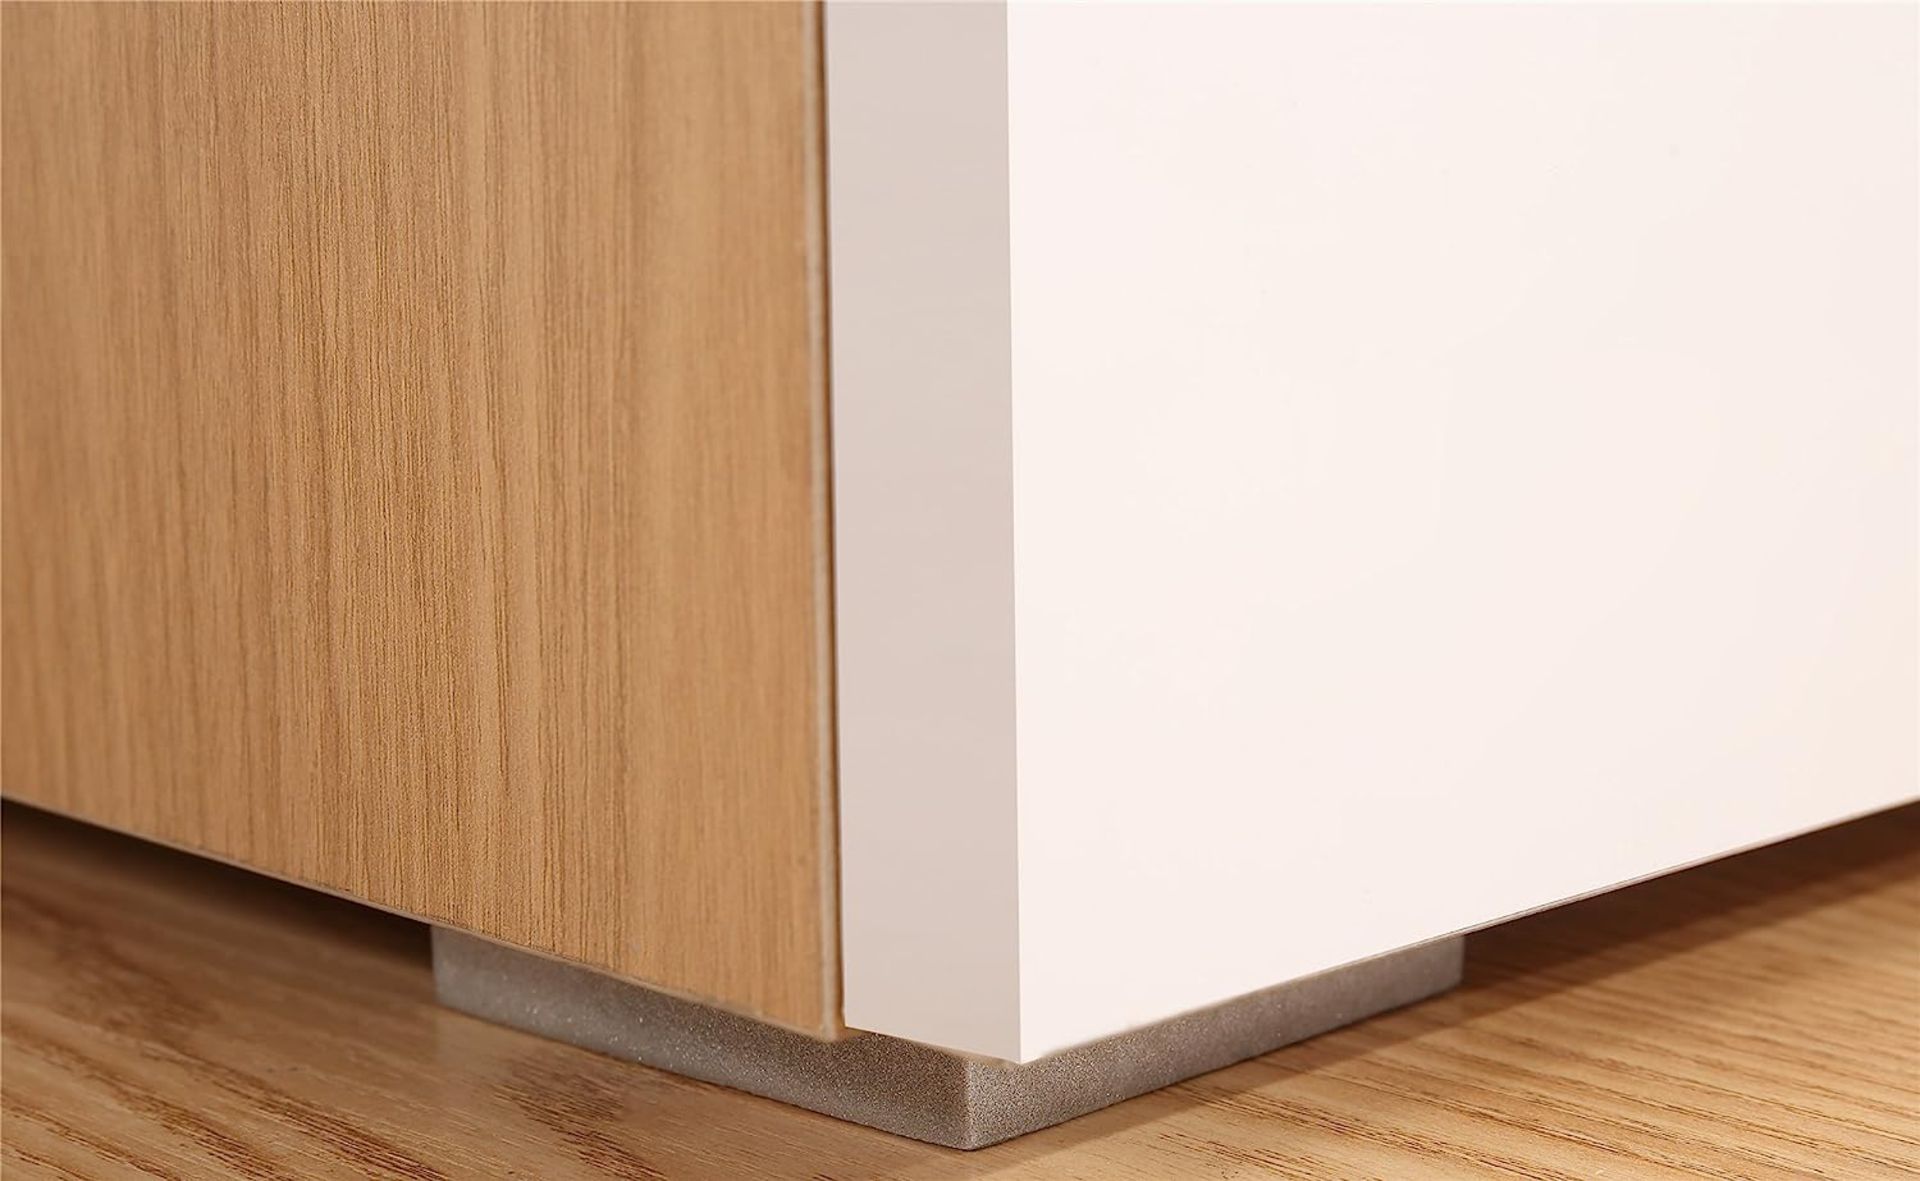 10 X BRAND NEW HARMIN MODERN 160CM TV STAND CABINET UNIT WITH HIGH GLOSS DOORS (WHITE ON OAK) - Image 9 of 9